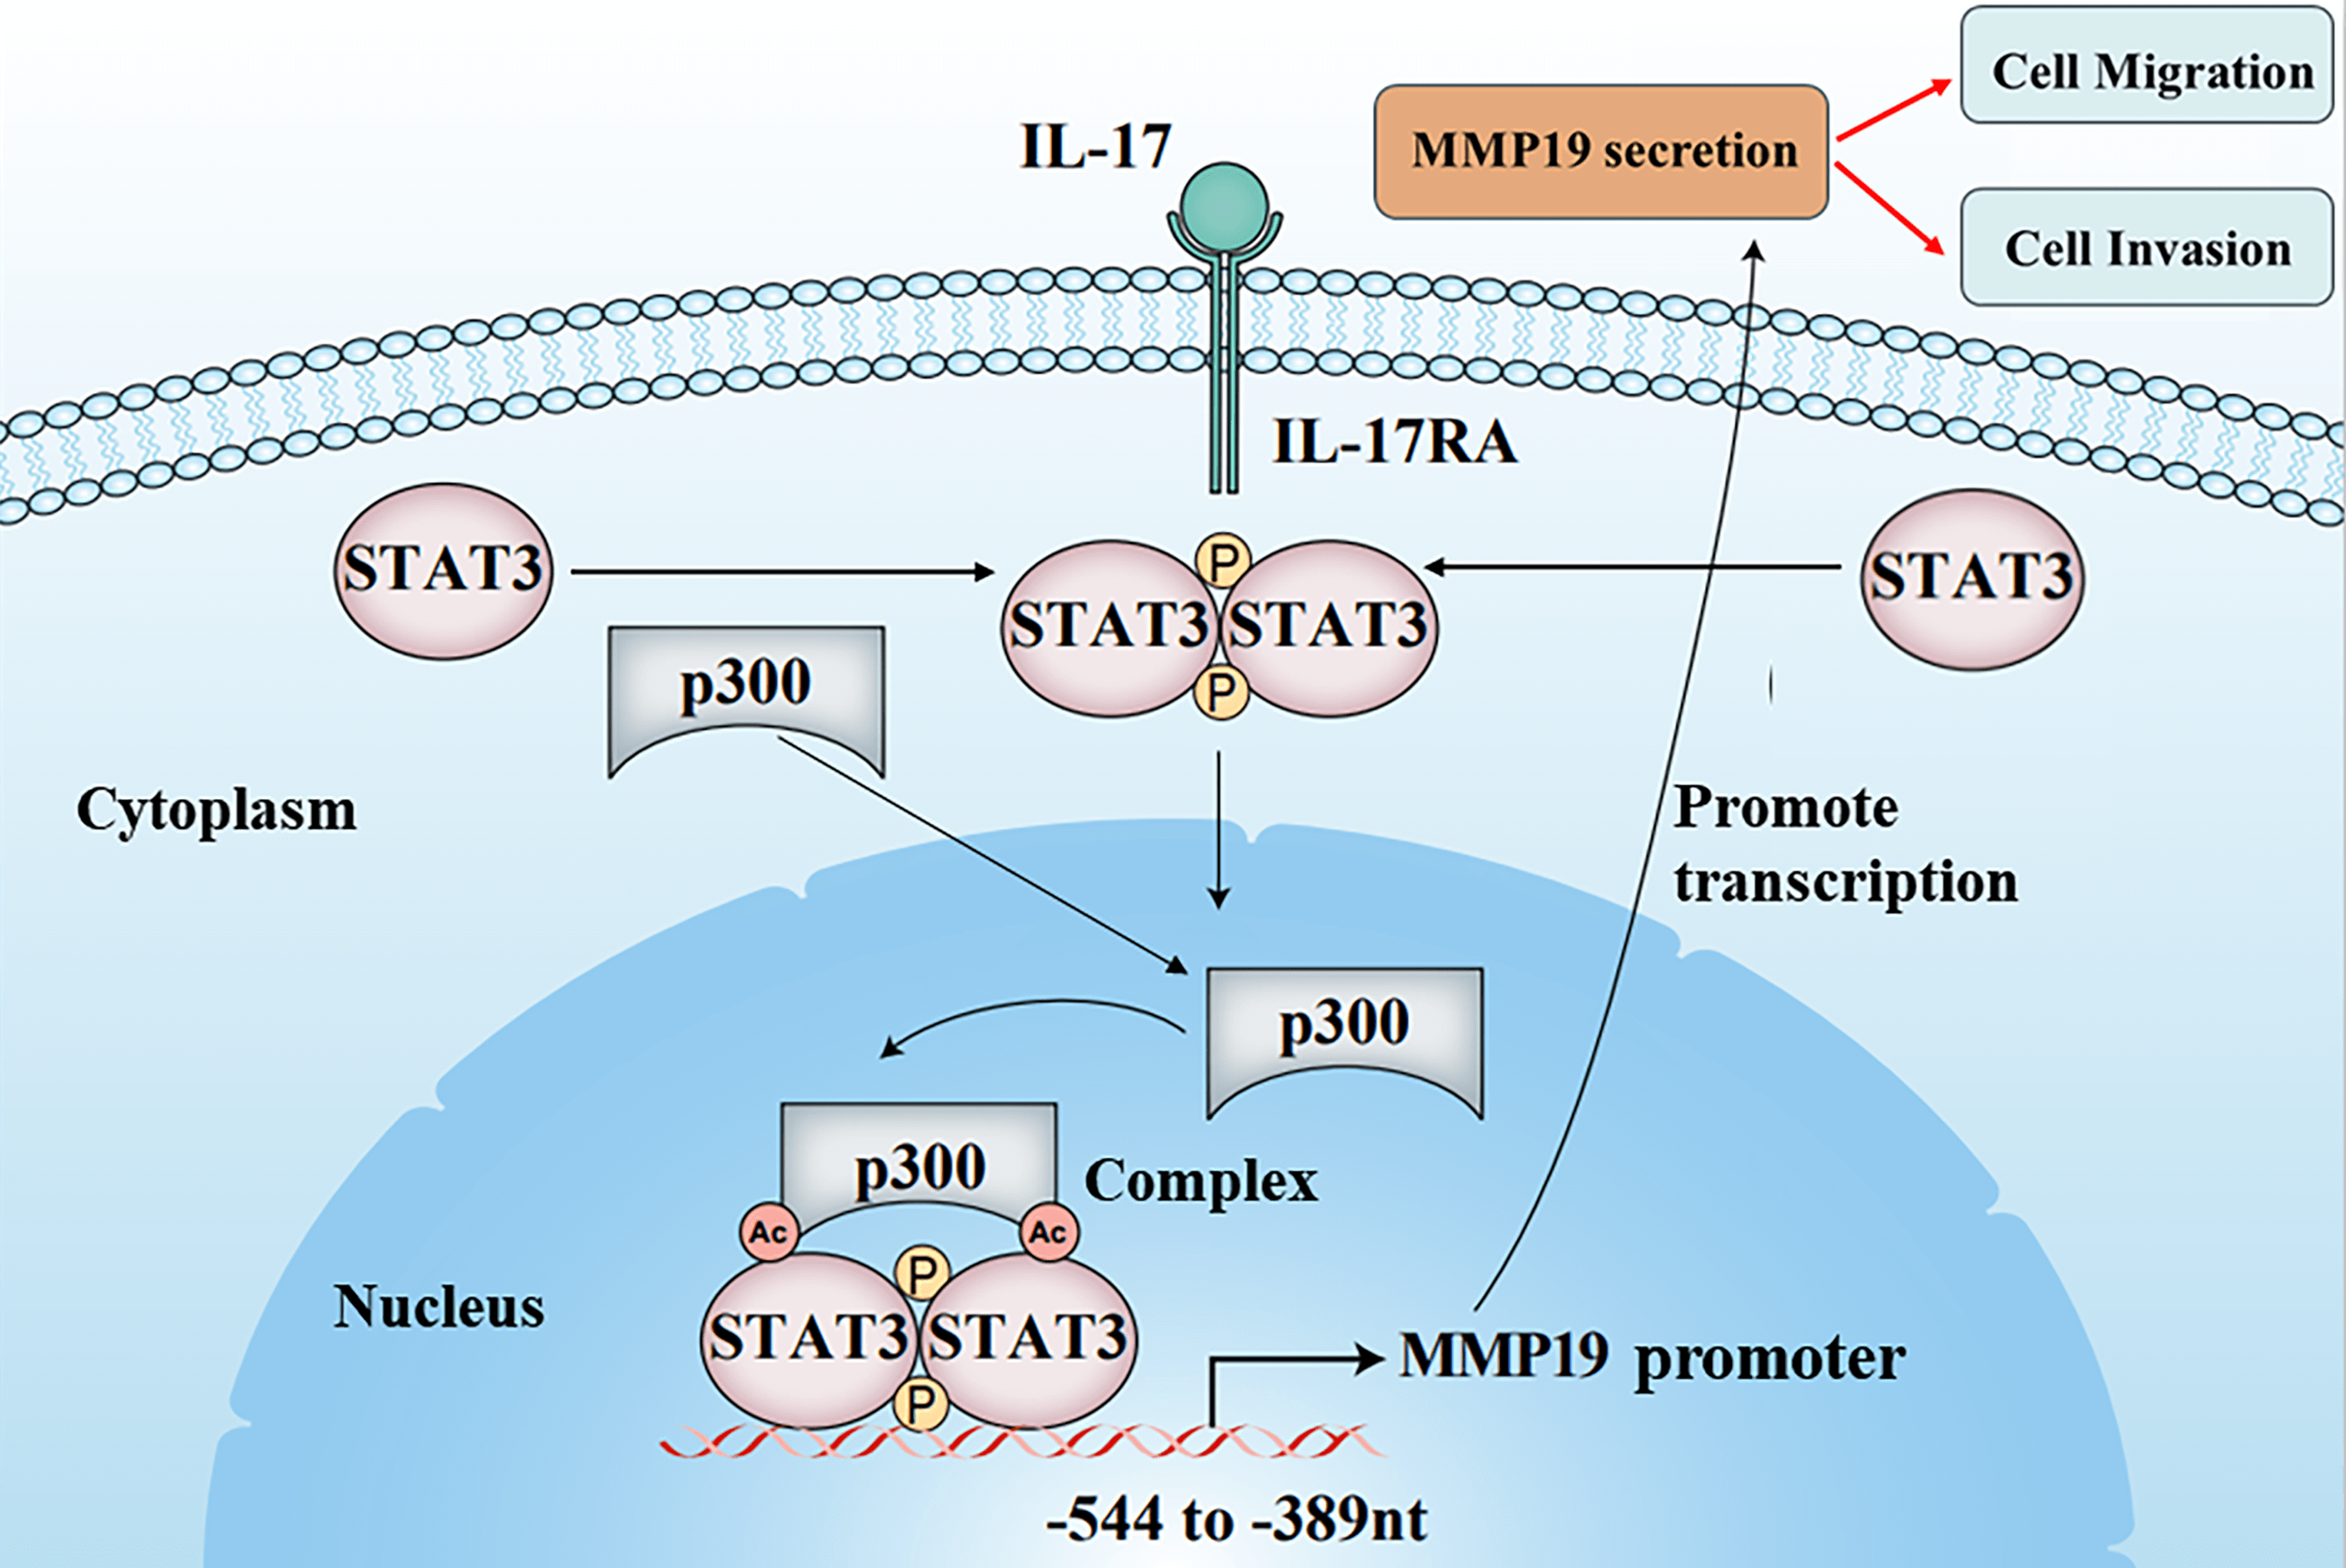 IL-17 induces NSCLC cell migration and invasion by elevating MMP19 gene transcription and expression through the interaction of p300-dependent STAT3-K631 acetylation and its Y705-phosphorylation